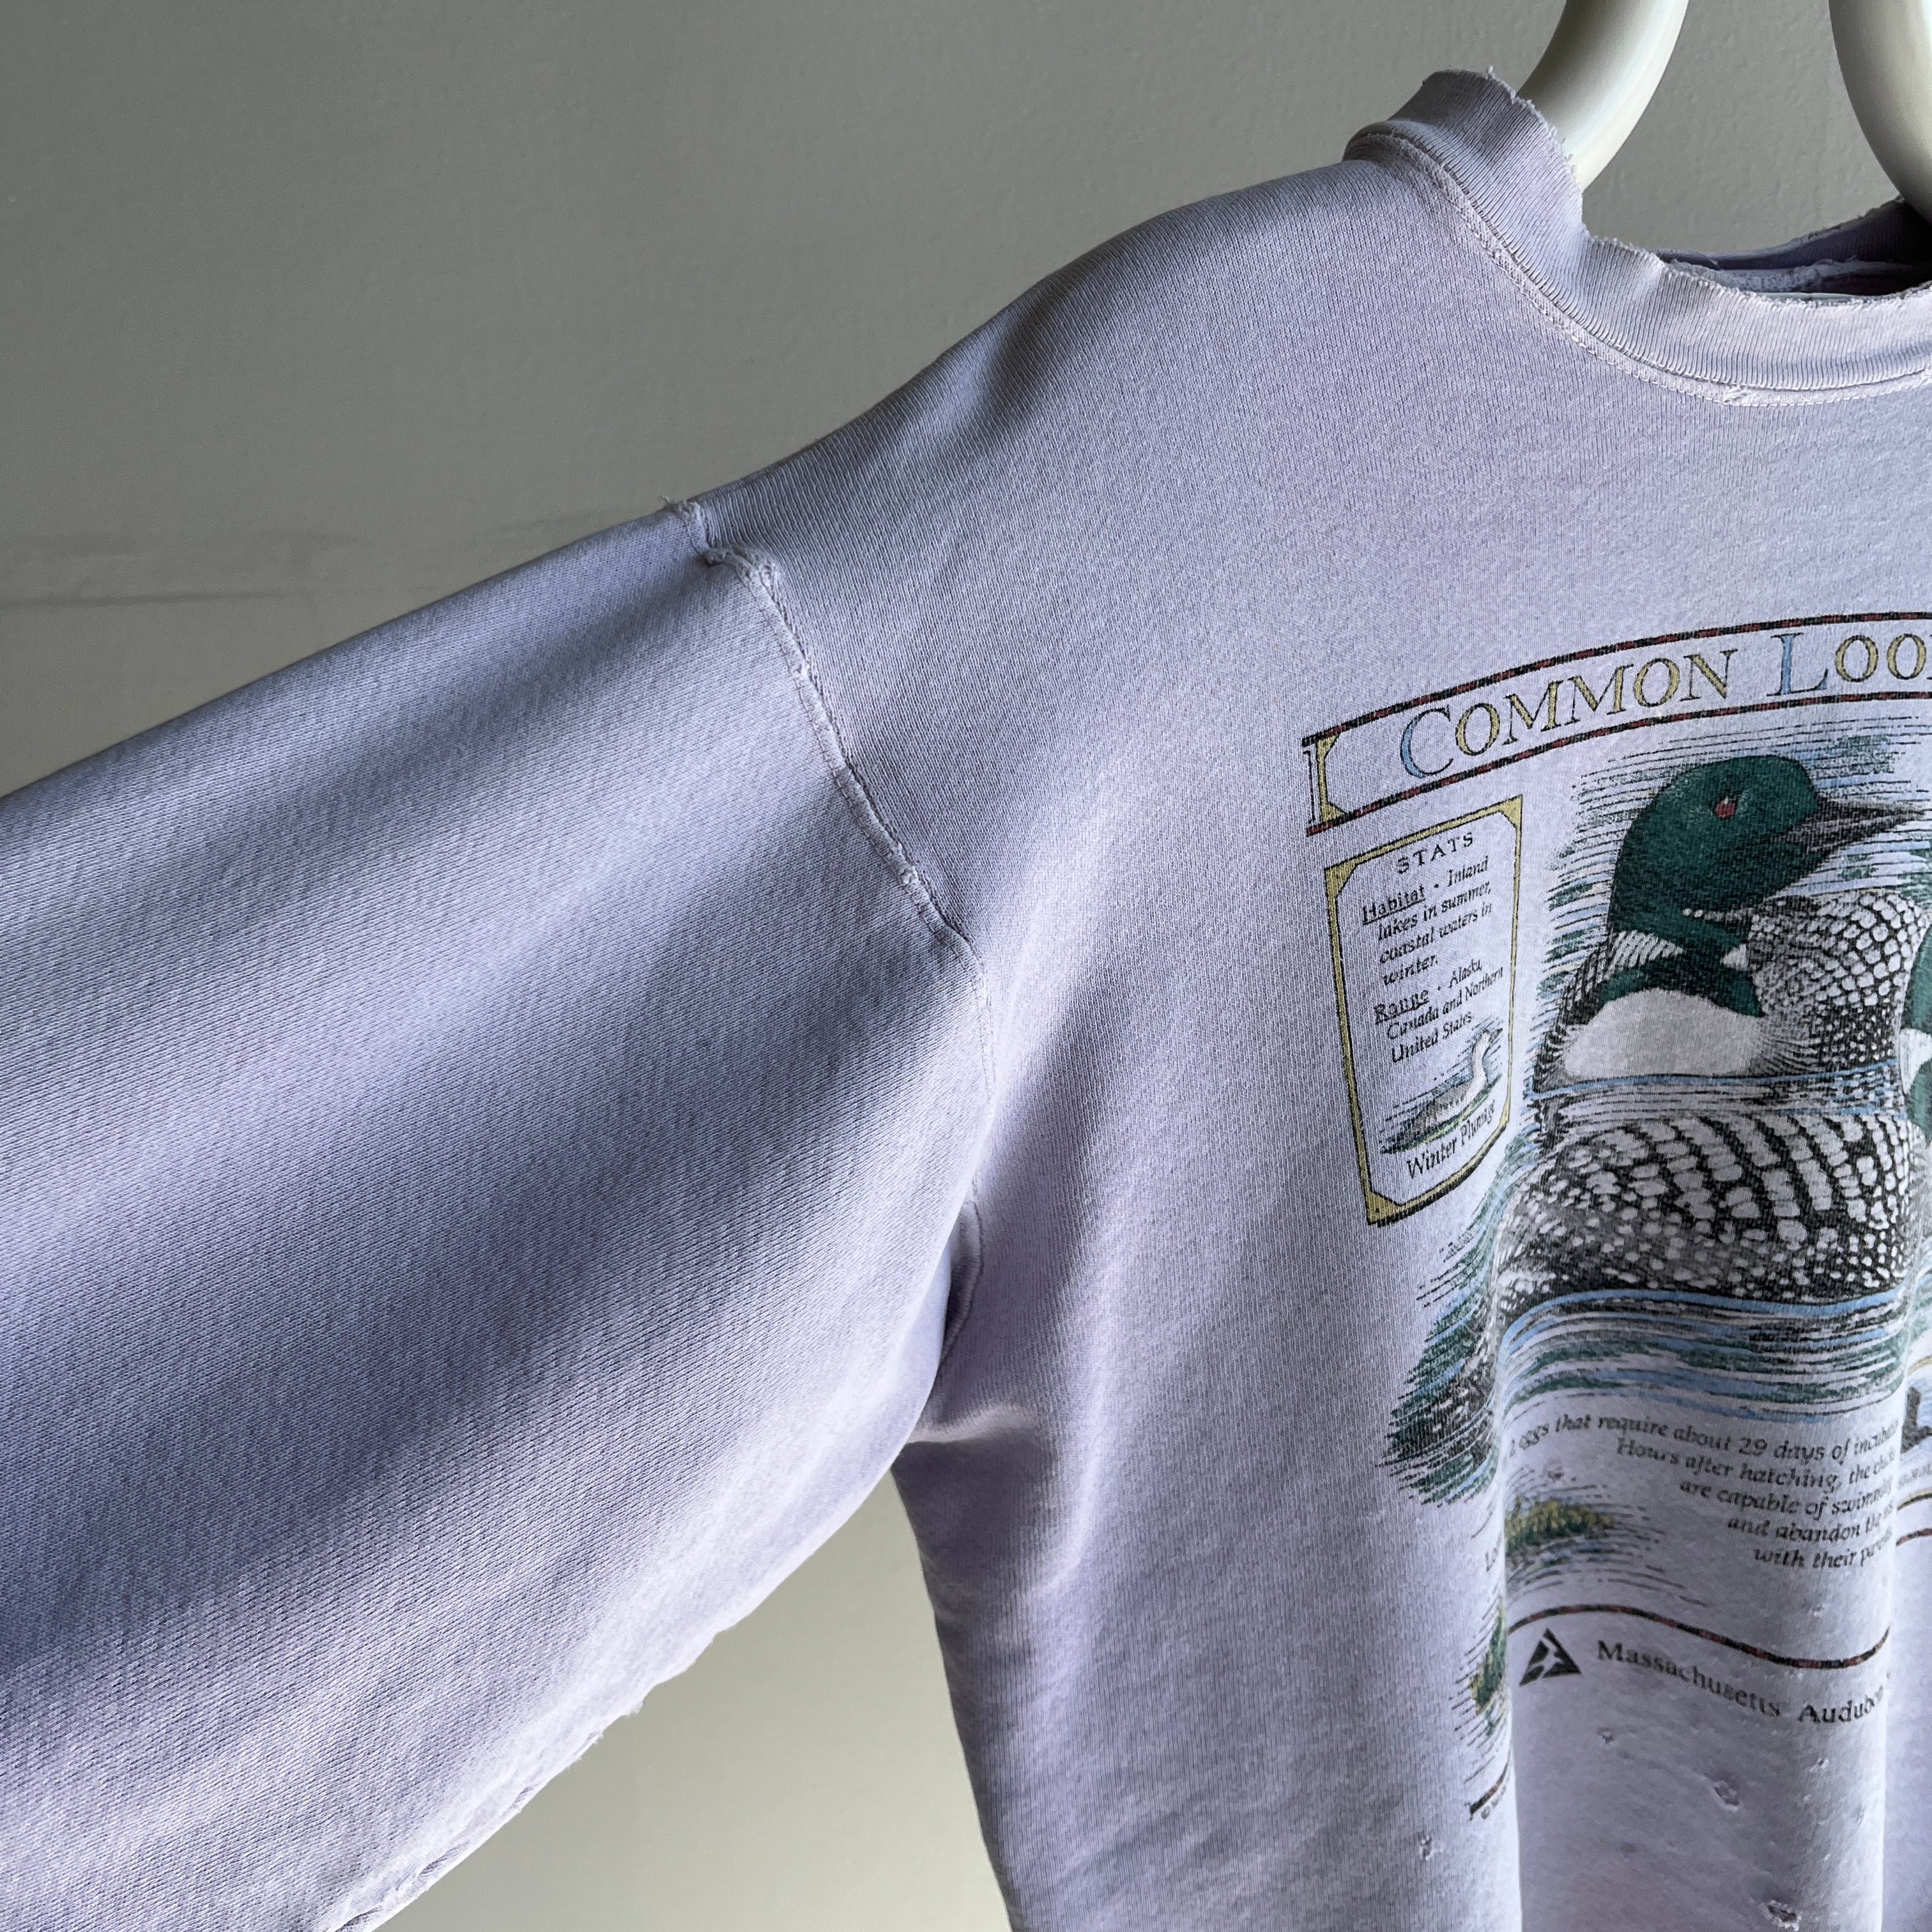 1980/90s Mostly Cotton Totally Destroyed Loon Sweatshirt